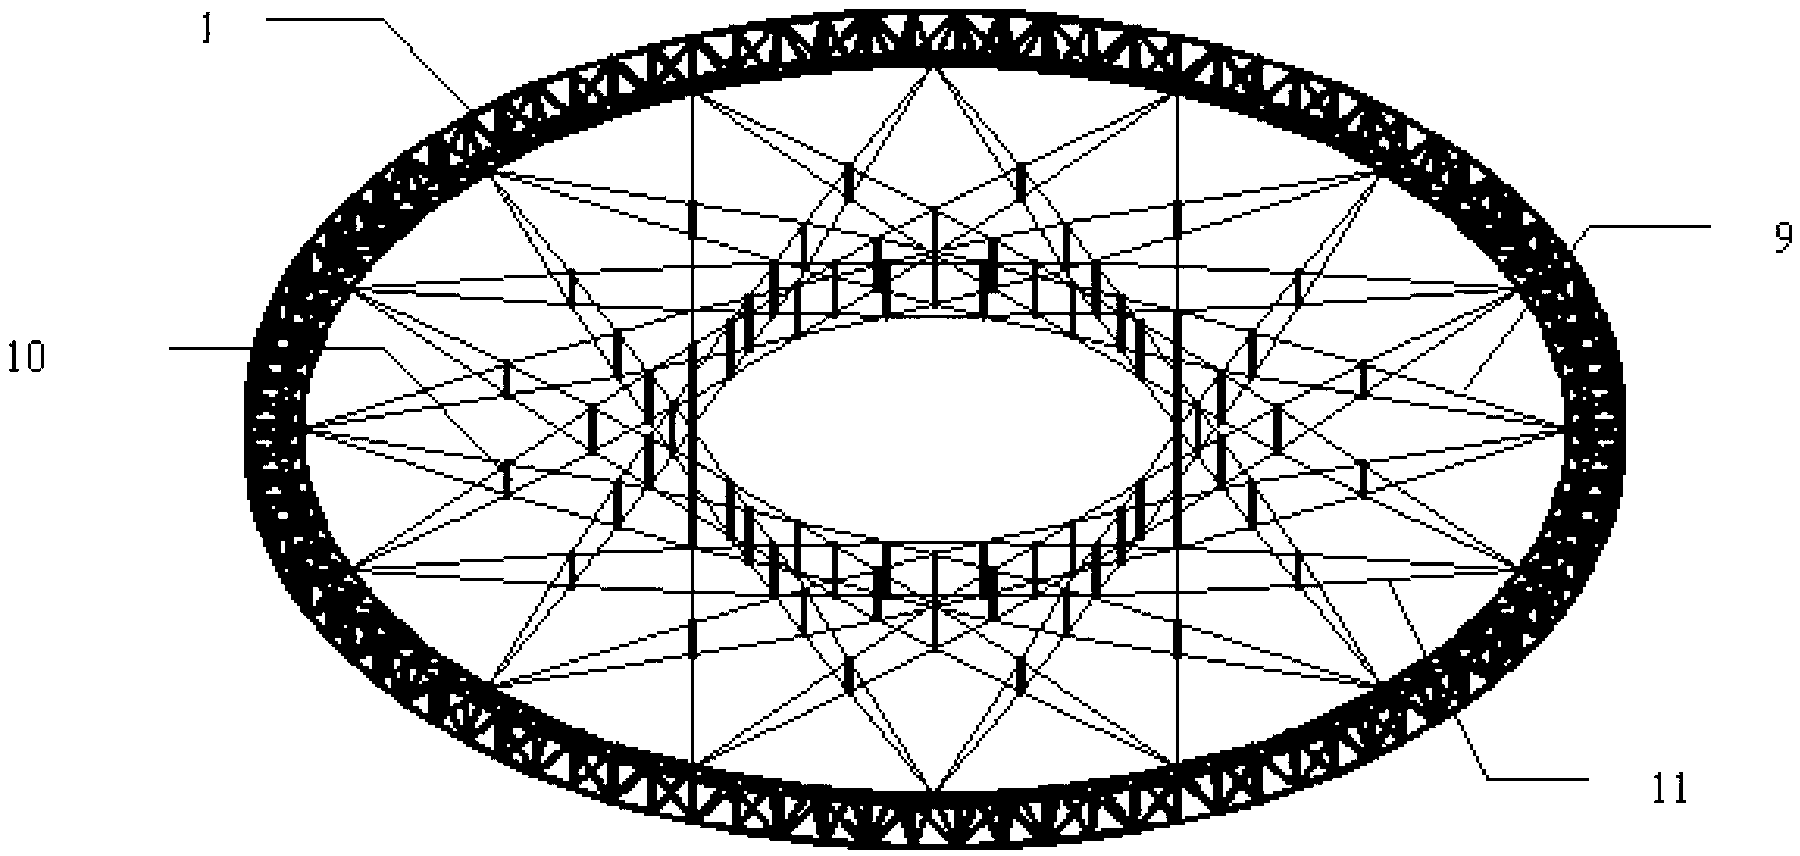 Annular cross cable truss structure